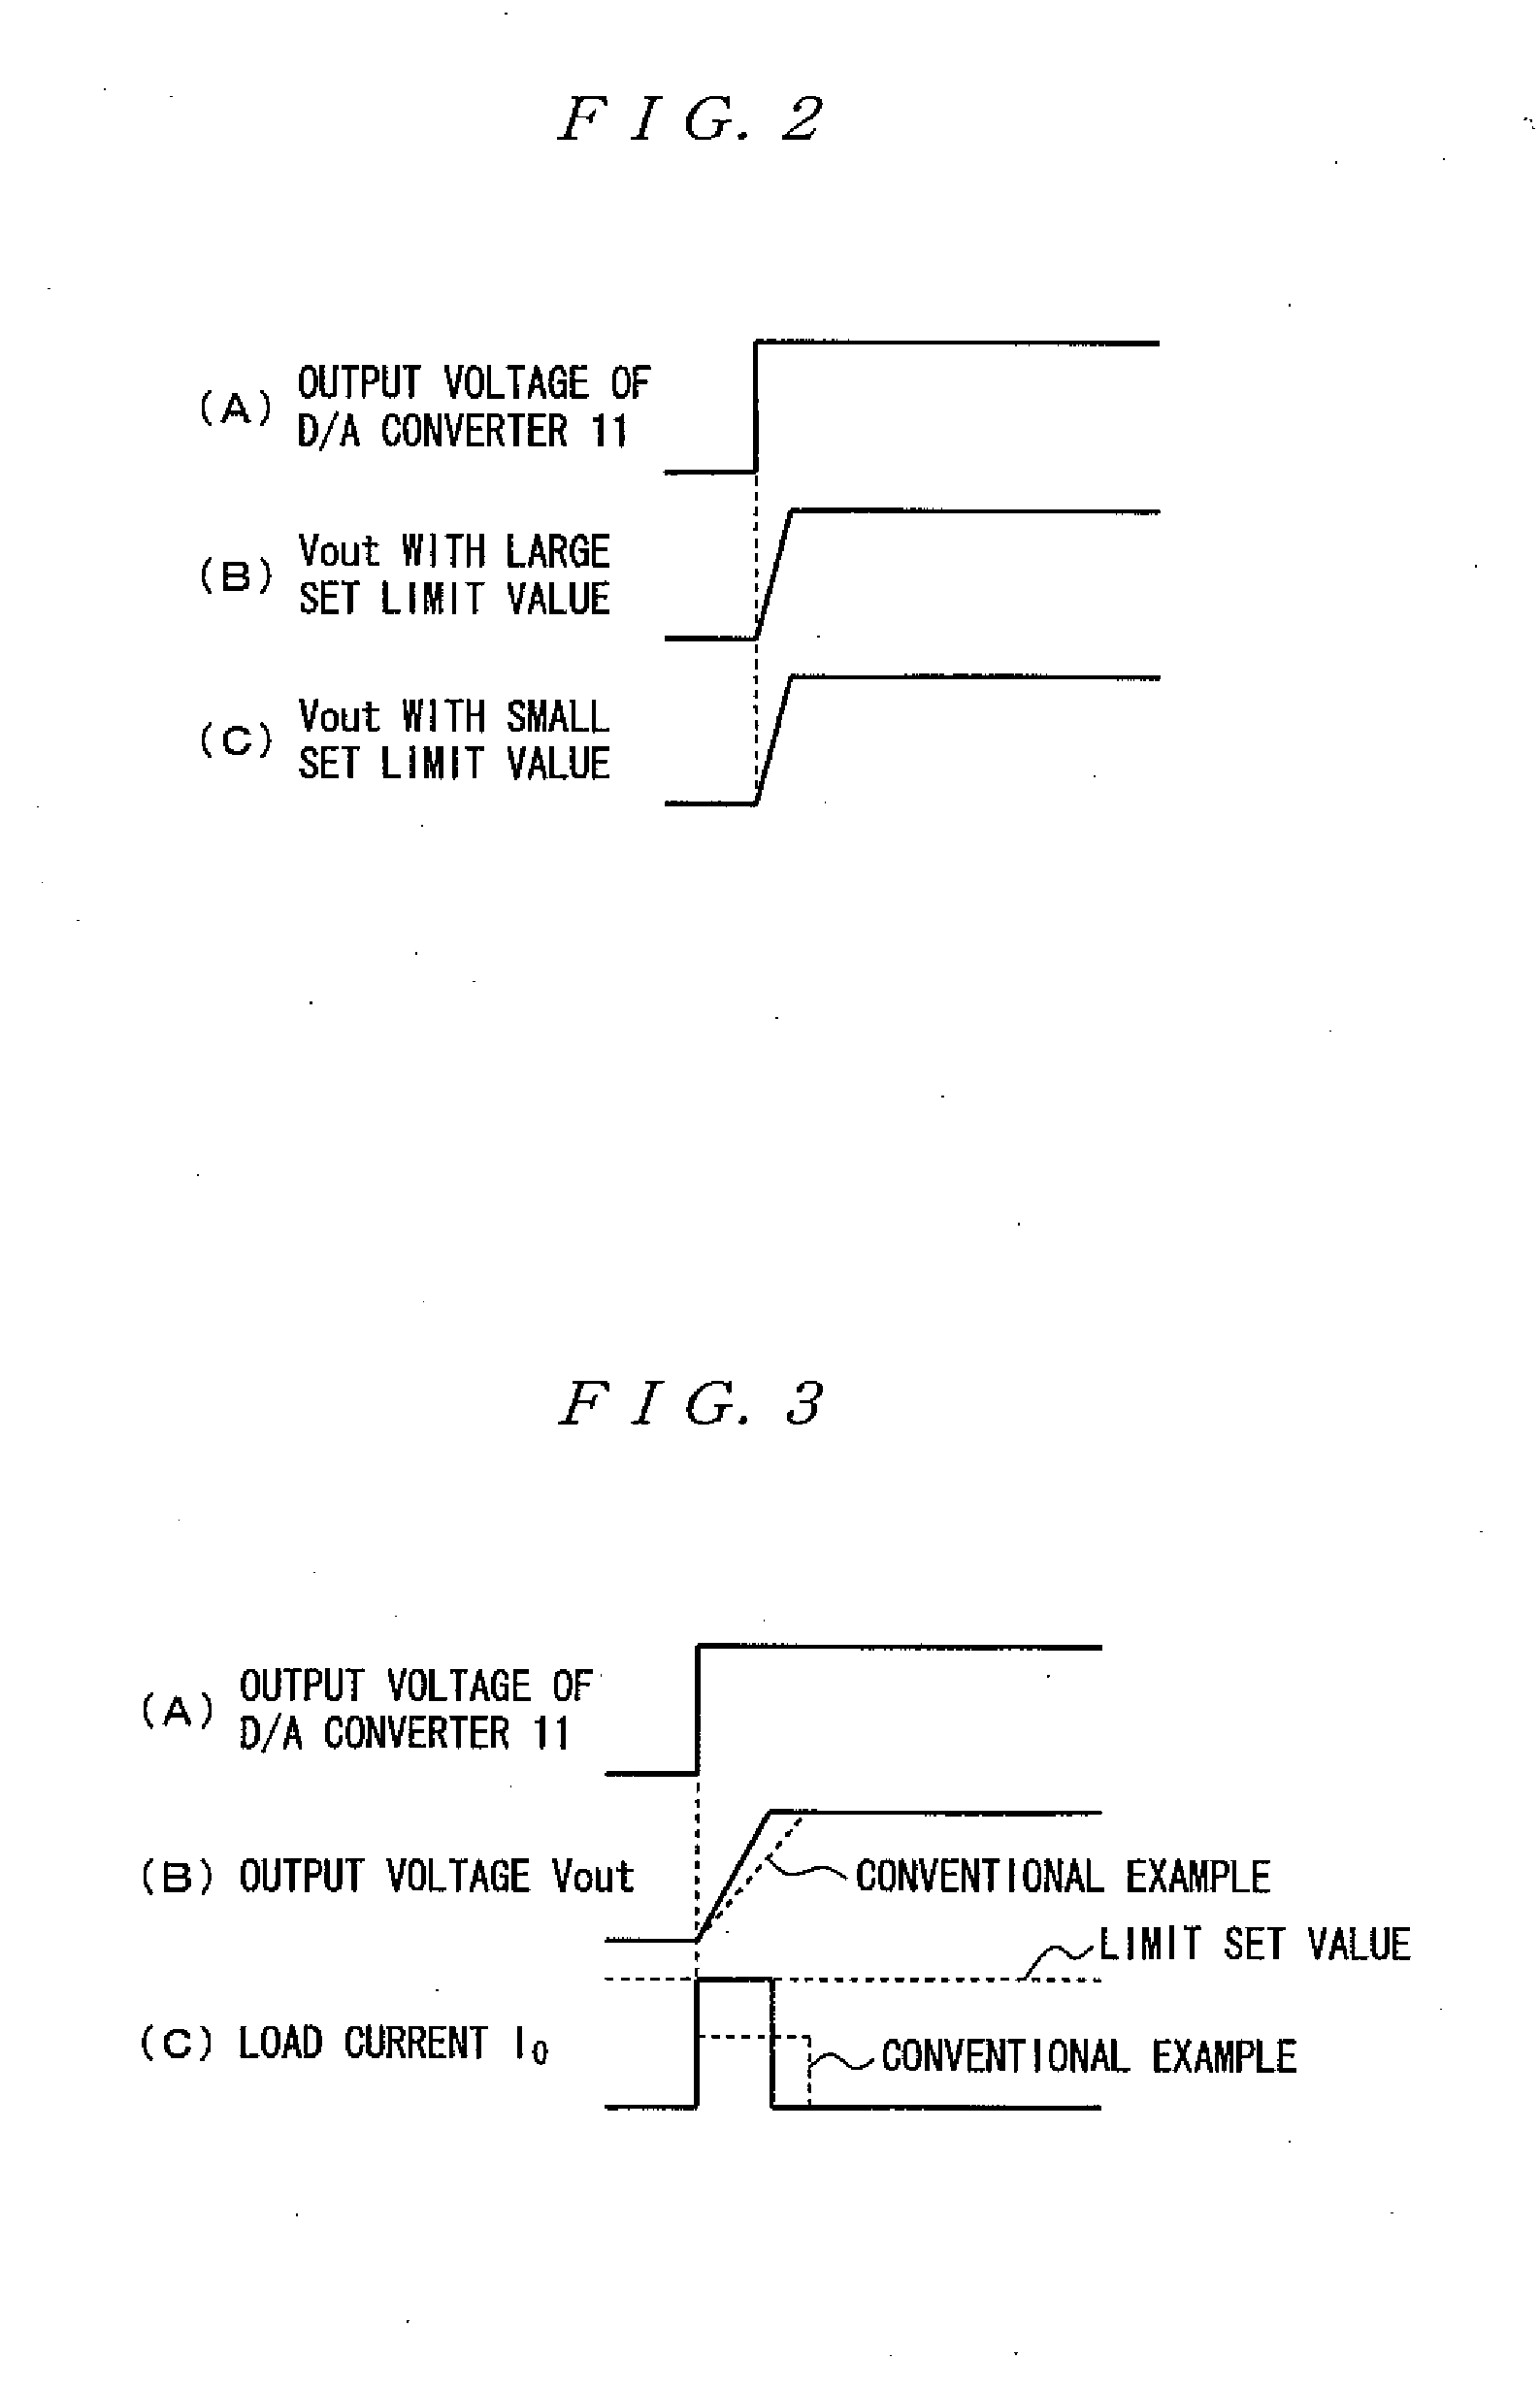 Direct current measuring apparatus and limiting circuit